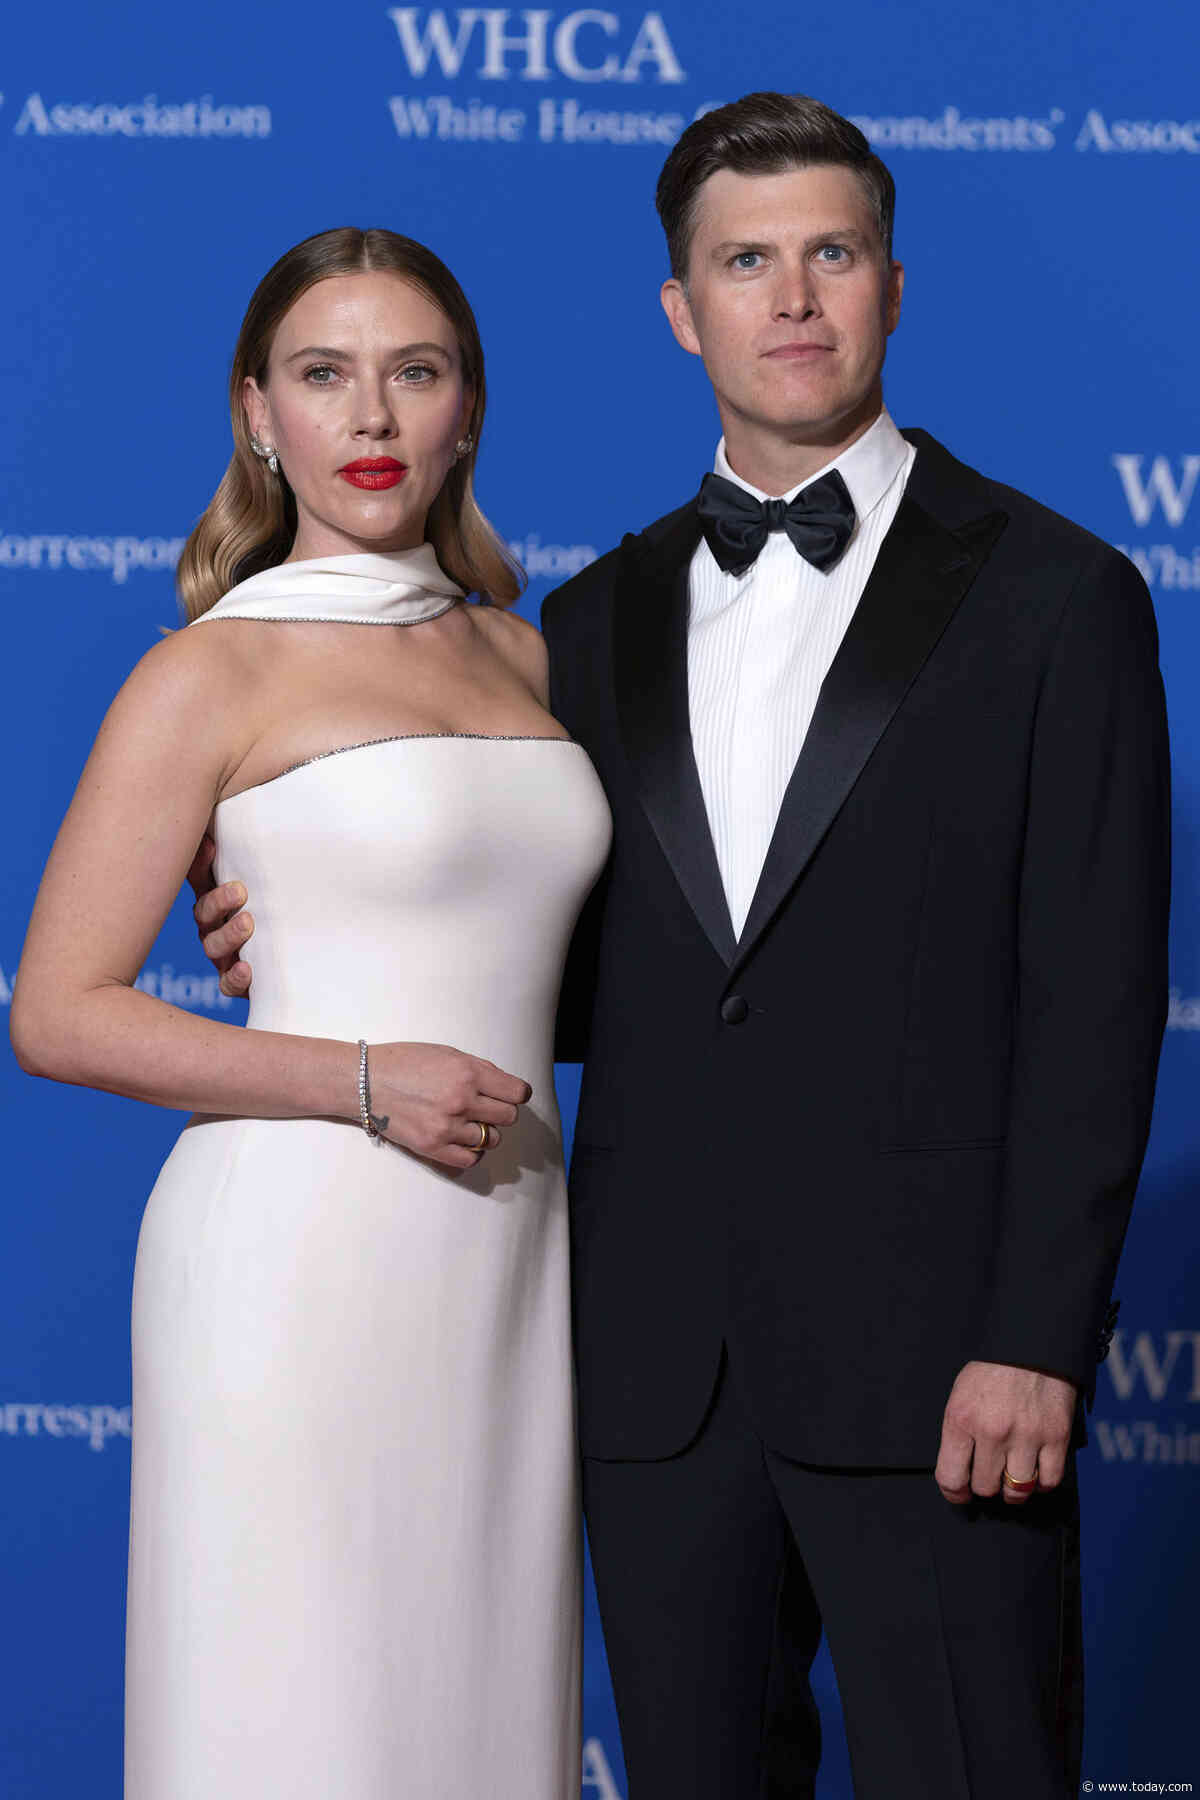 Colin Jost jokes about married life with Scarlett Johansson at White House Correspondents’ Dinner